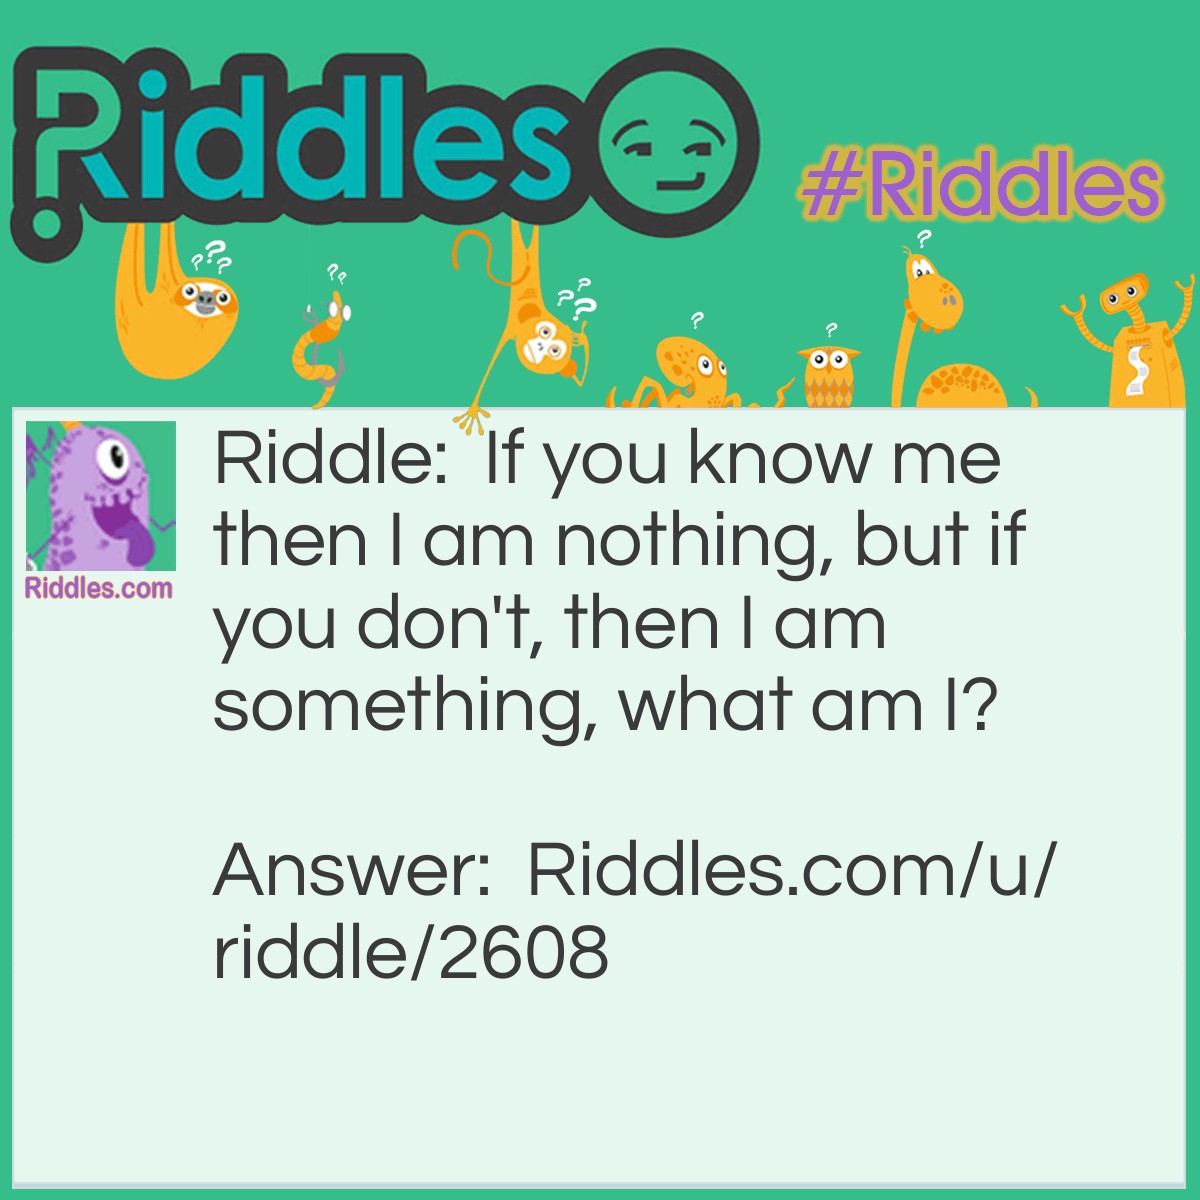 Riddle: If you know me then I am nothing, but if you don't, then I am something, what am I? Answer: A riddle.